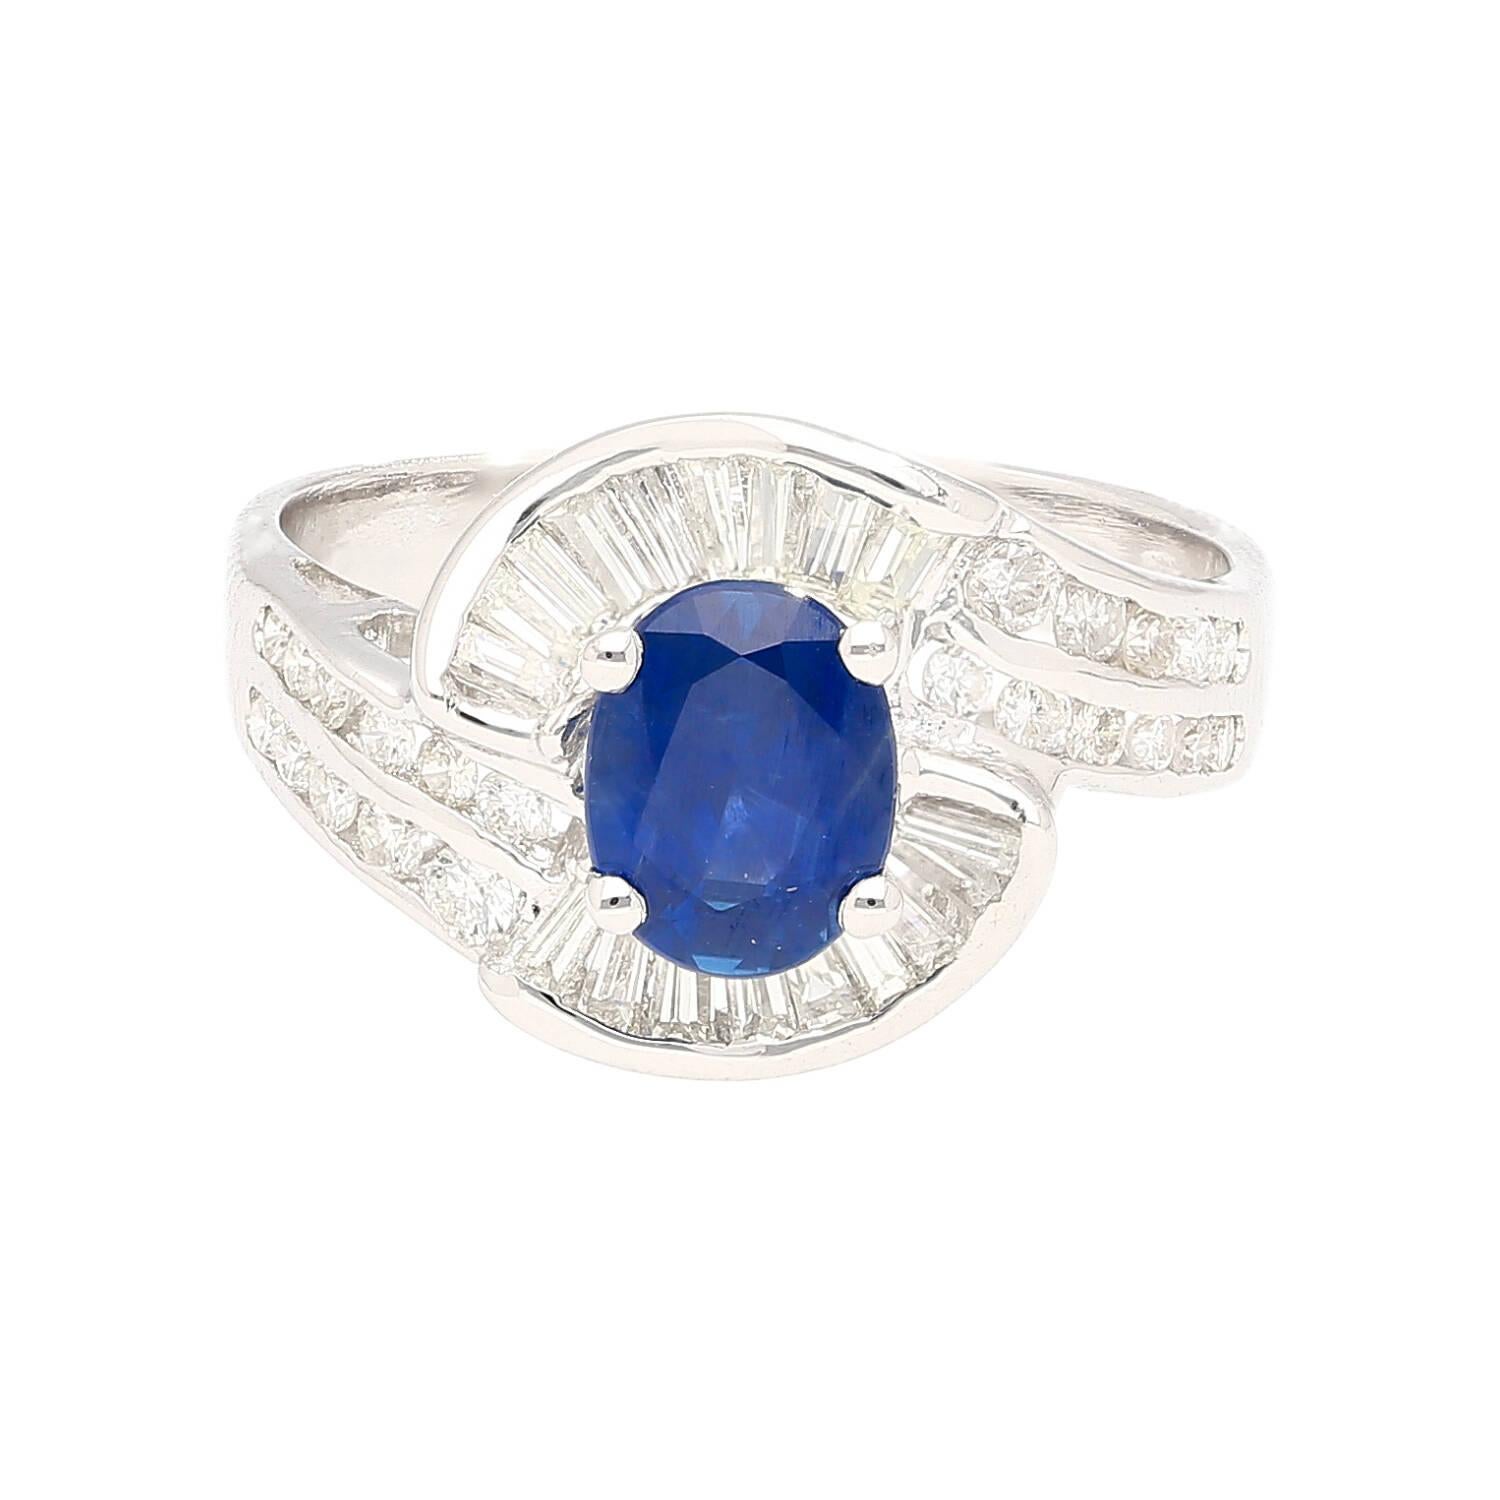 A natural 1.14-carat oval-cut blue sapphire takes center stage in this exquisite 18K white gold ring. The mesmerizing blue hue of the sapphire is complemented by a cluster of round and baguette-cut diamonds, adding brilliance to the swirling